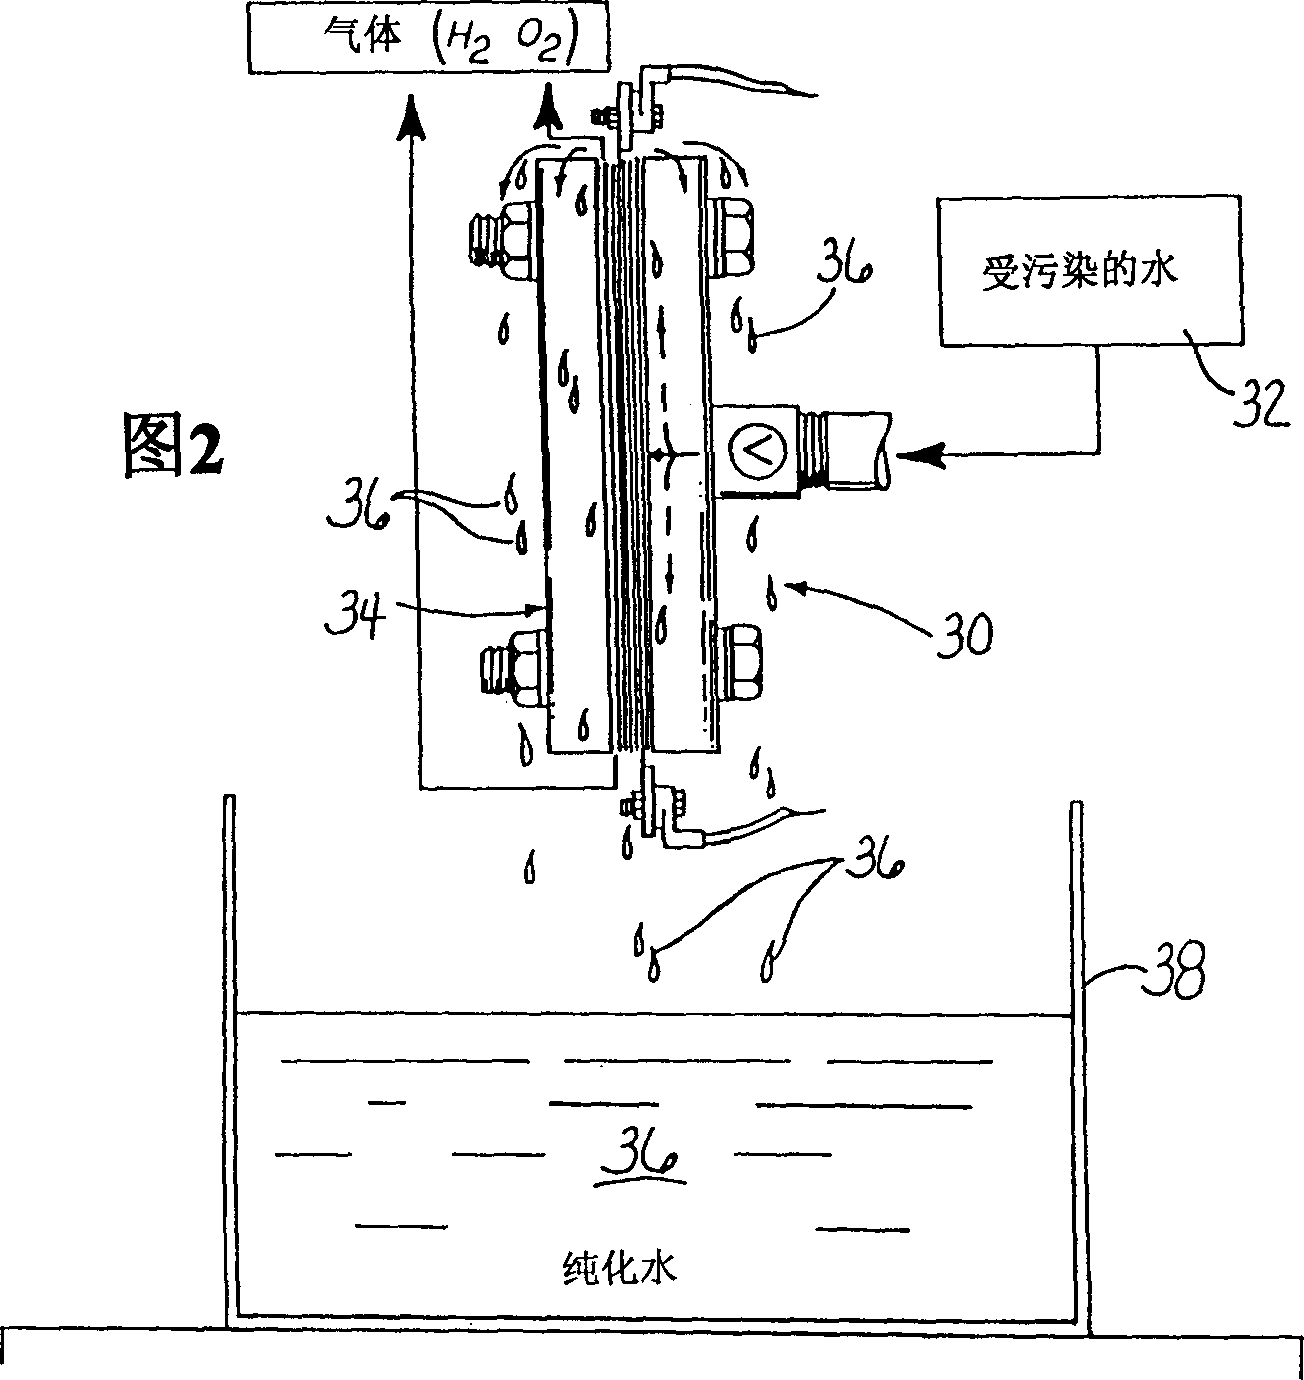 Electrolytic apparatus, methods purification of aqueous solutions and synthesis of chemicals